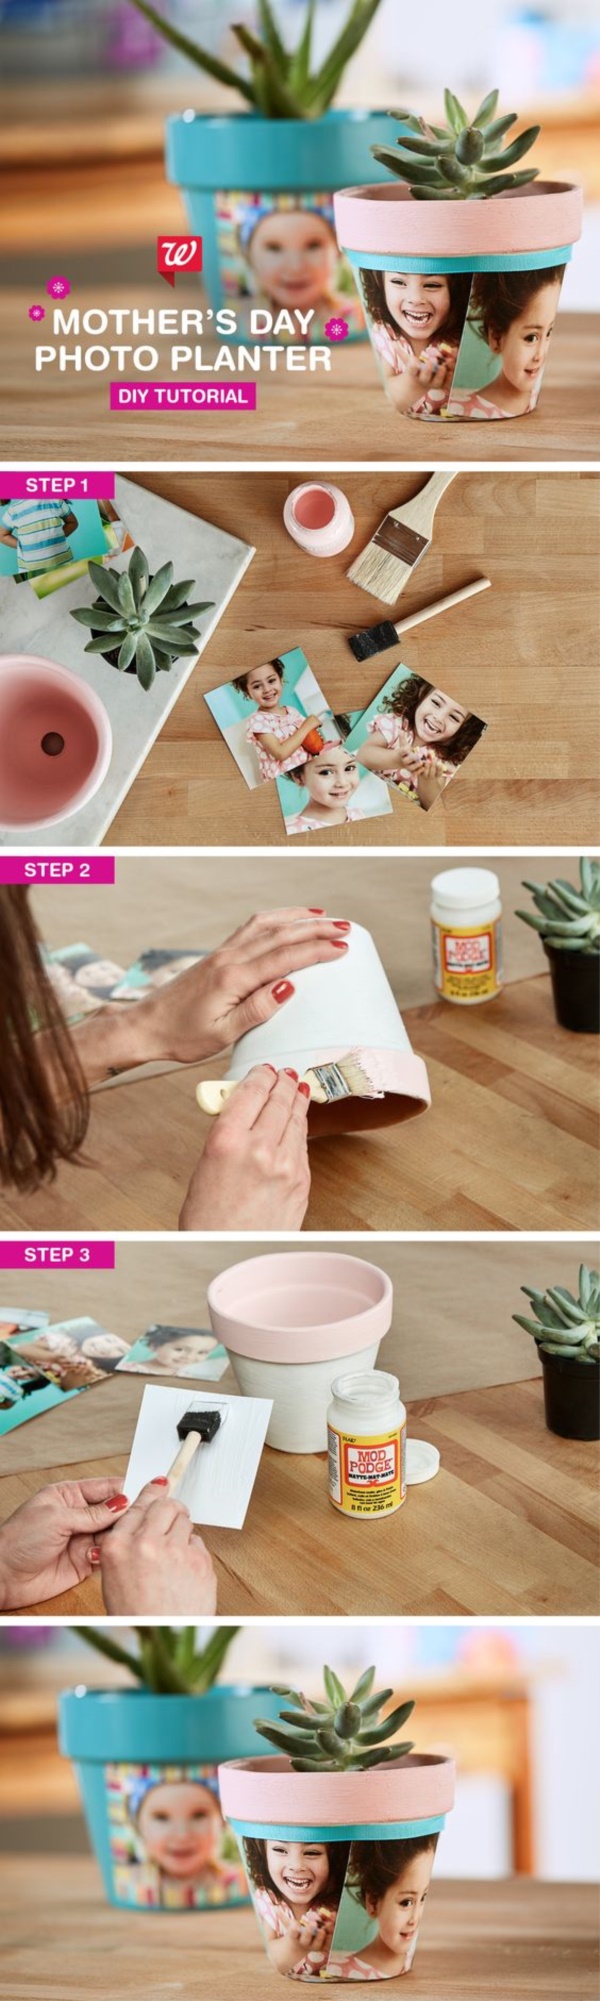 diy-mothers-day-crafts-ideas-kids